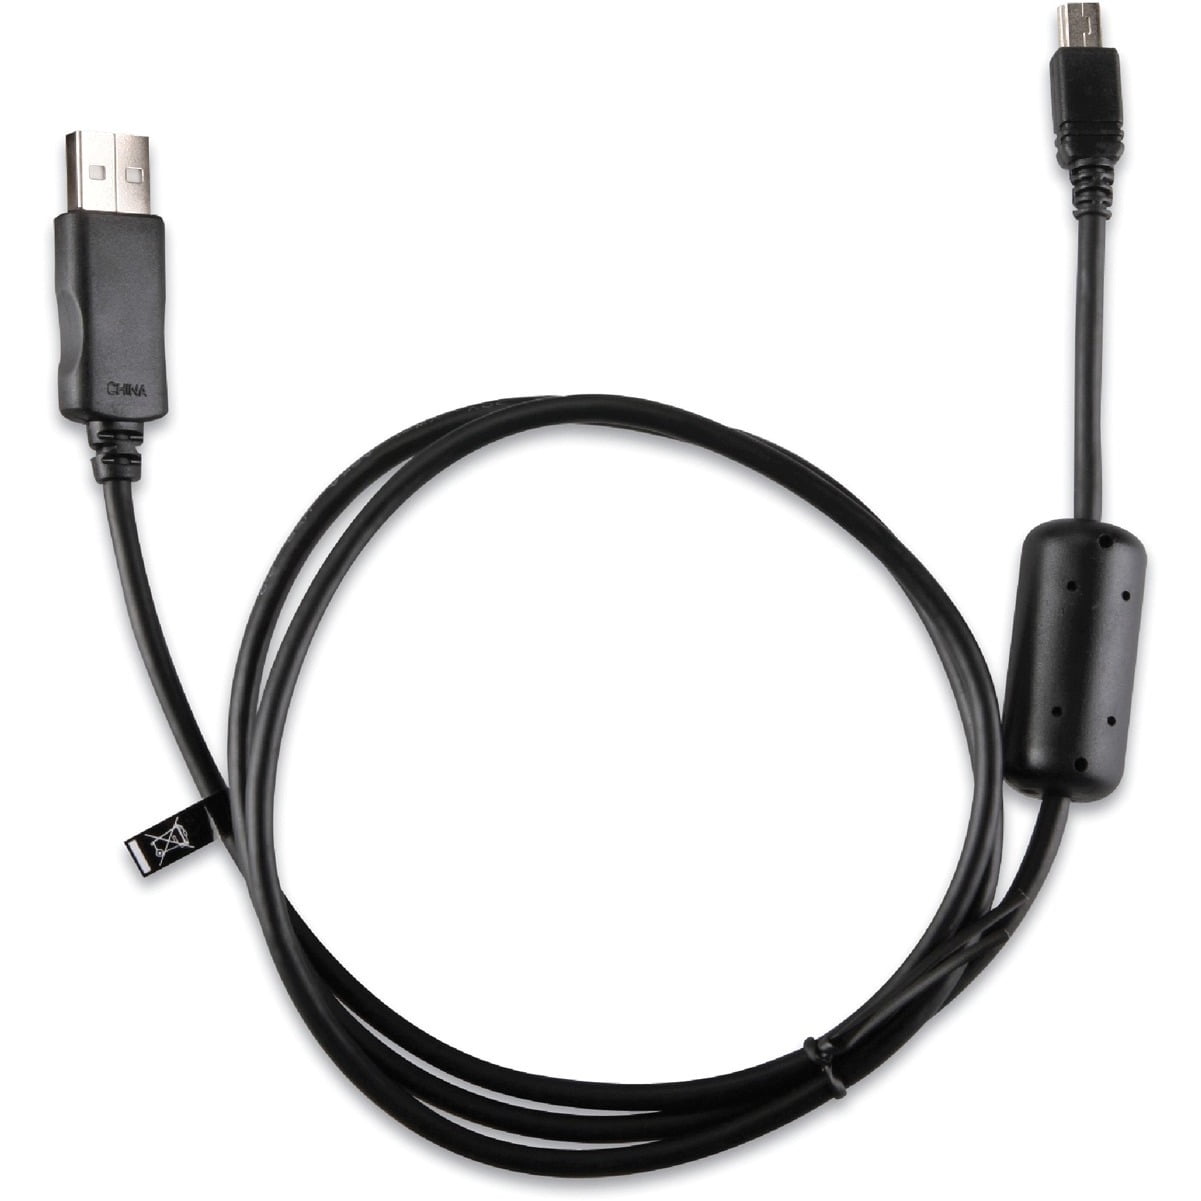 Garmin 010 11478 01 Usb Cable Adapter Usb For Gps Receiver Male